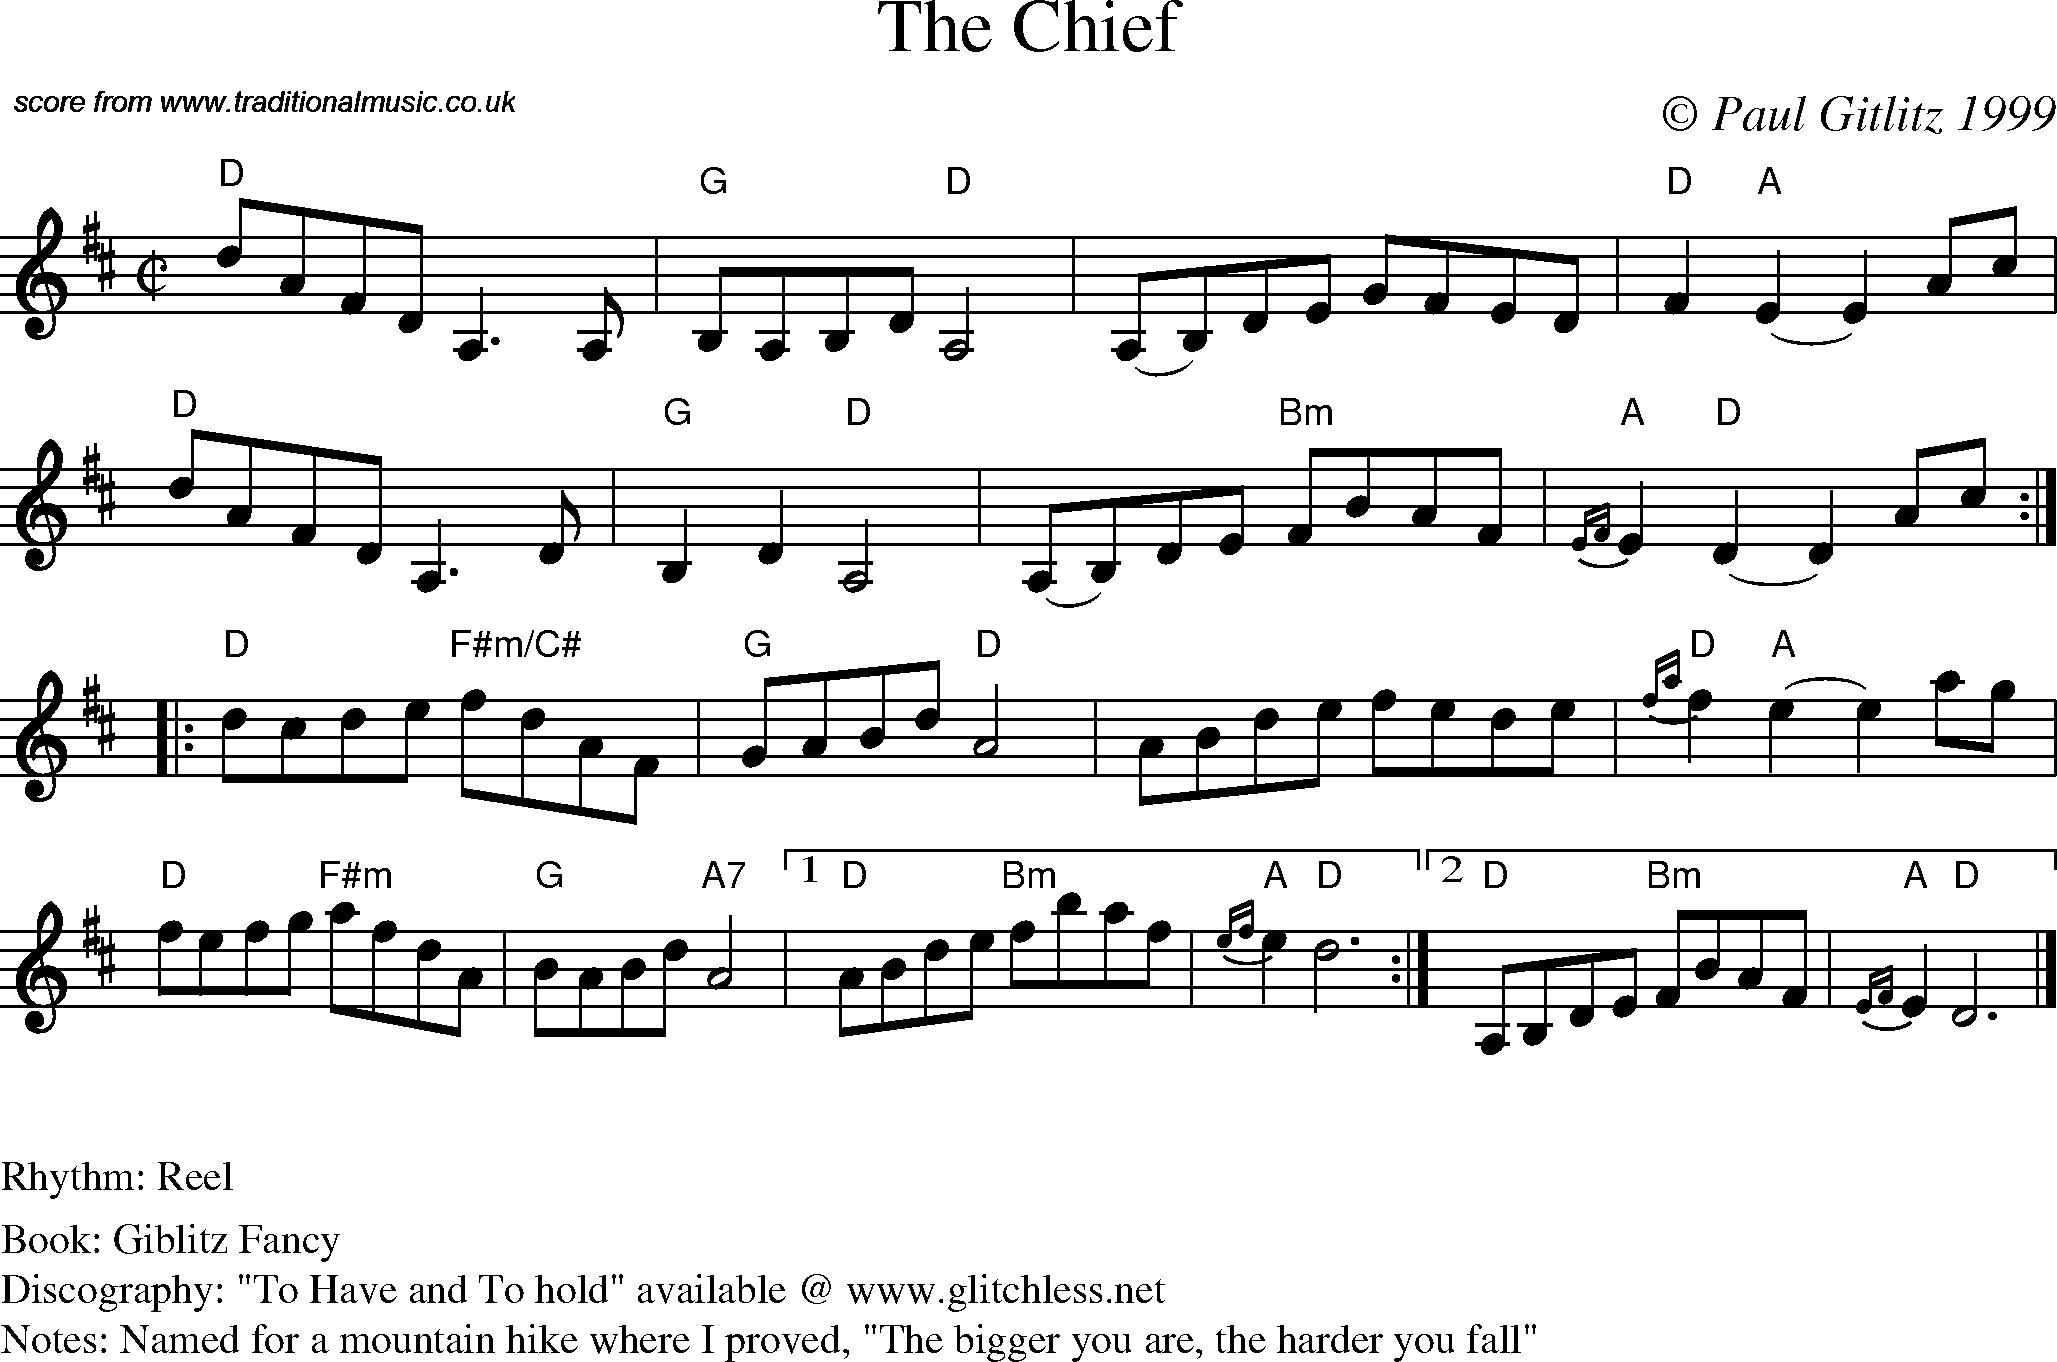 Sheet Music Score for Reel - The Chief